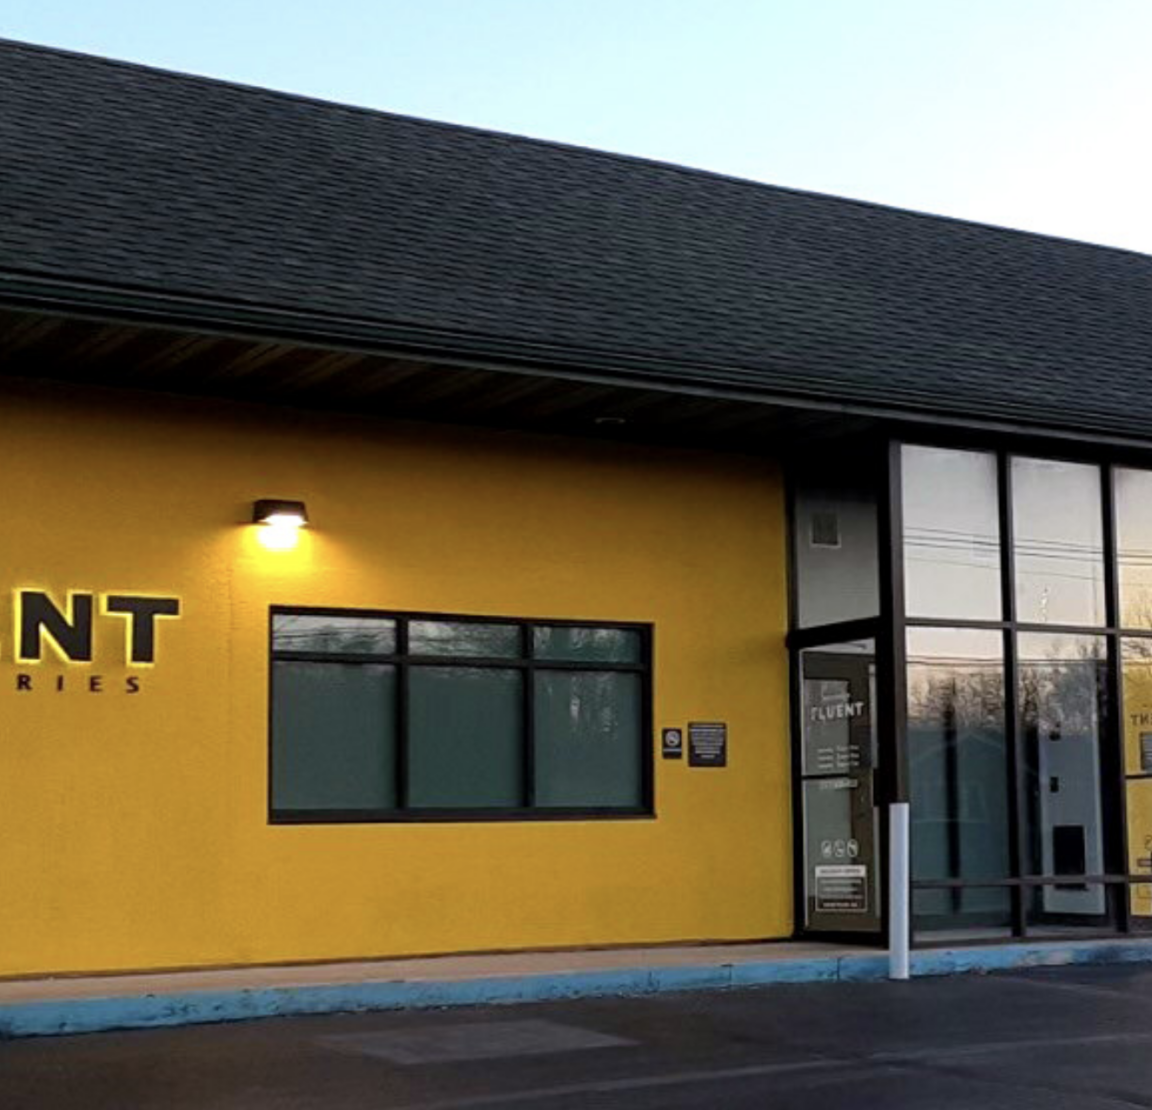 Opening 4/20: Get FLUENT in Annville, PA!